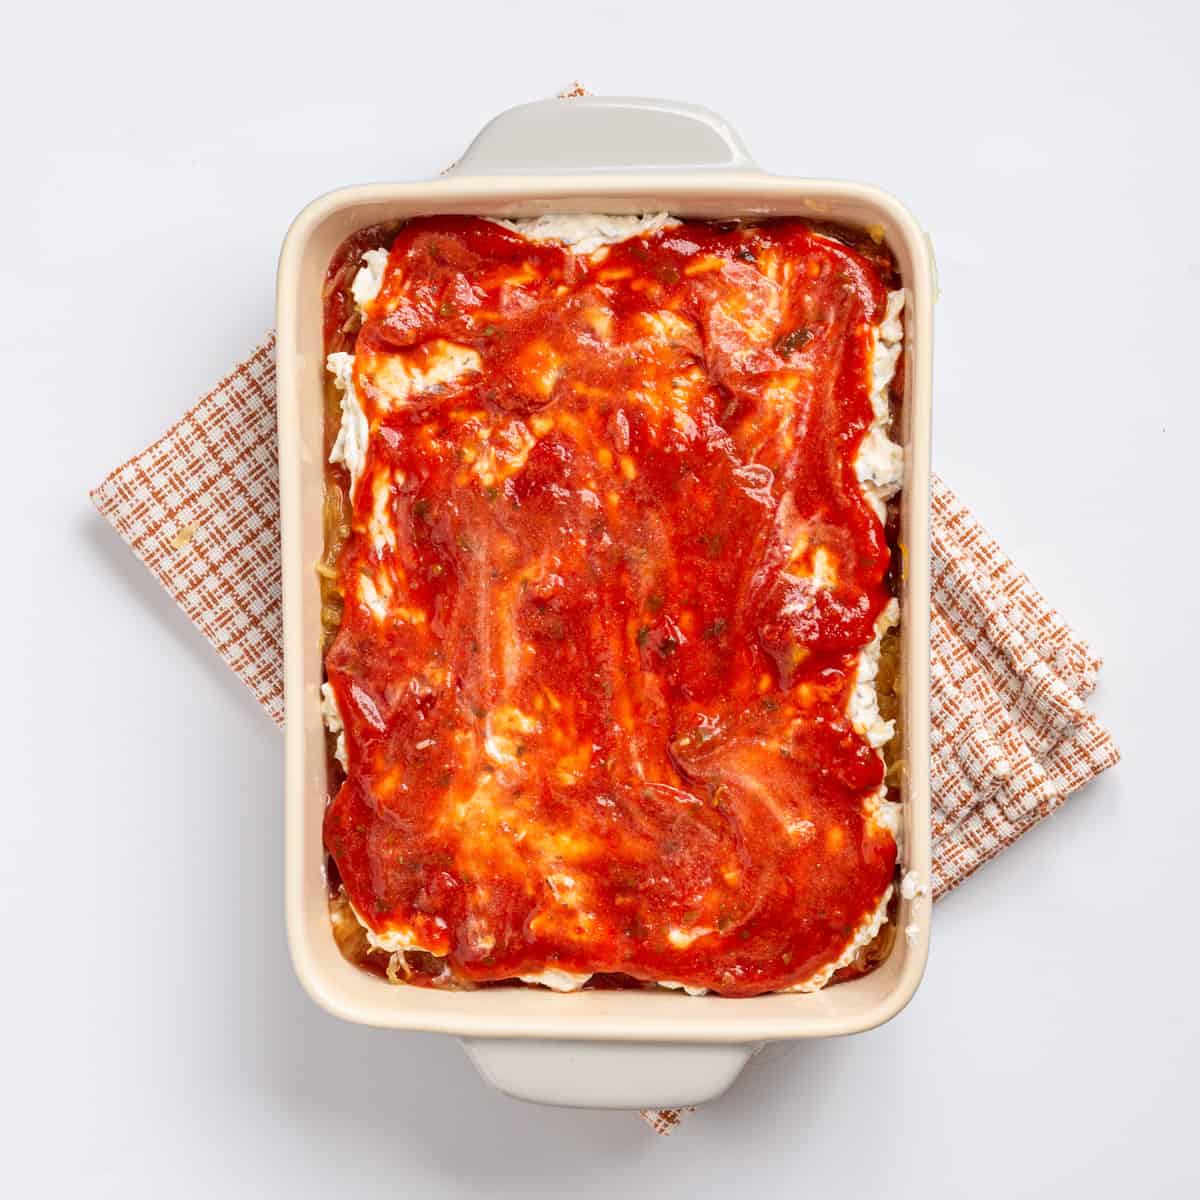 An image of another layer of marinara sauce spread on top of the layer of ricotta cheese.